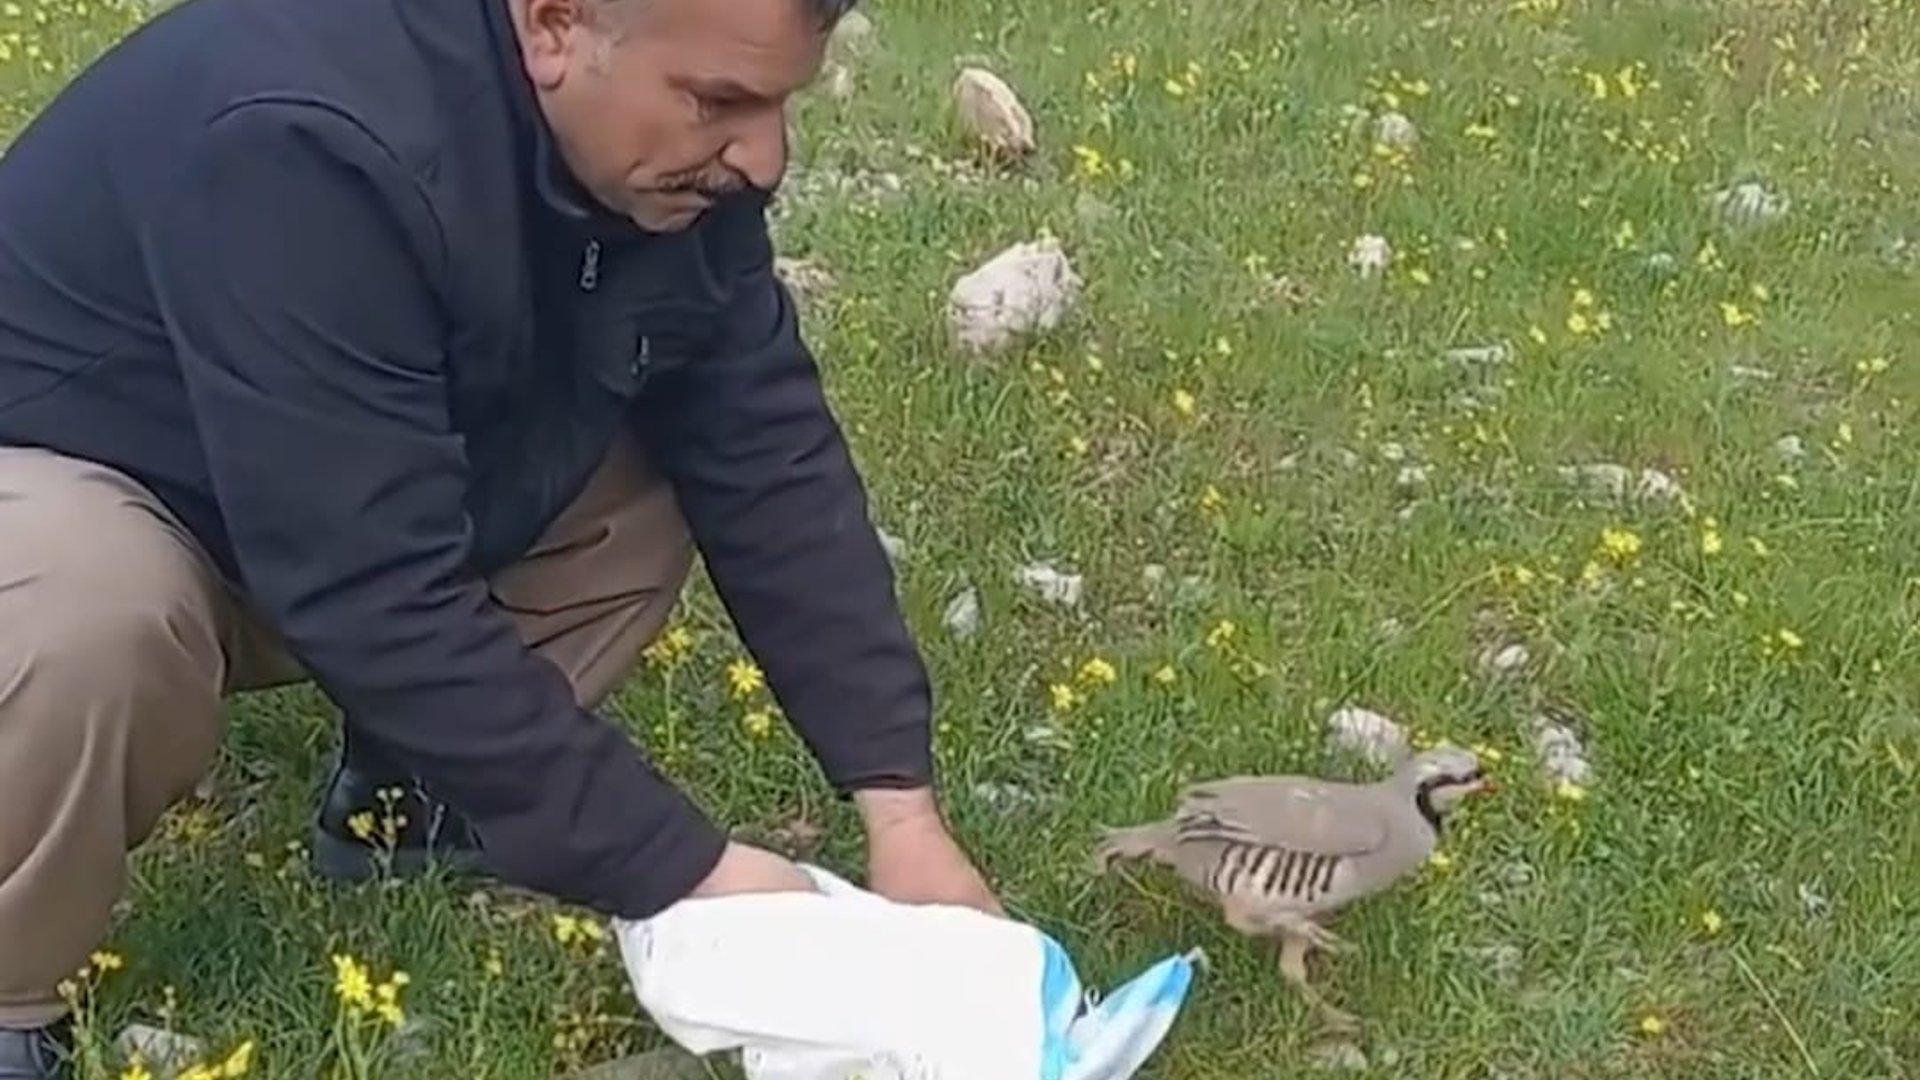 Halabja village resident chooses to release captured chukars into the wild